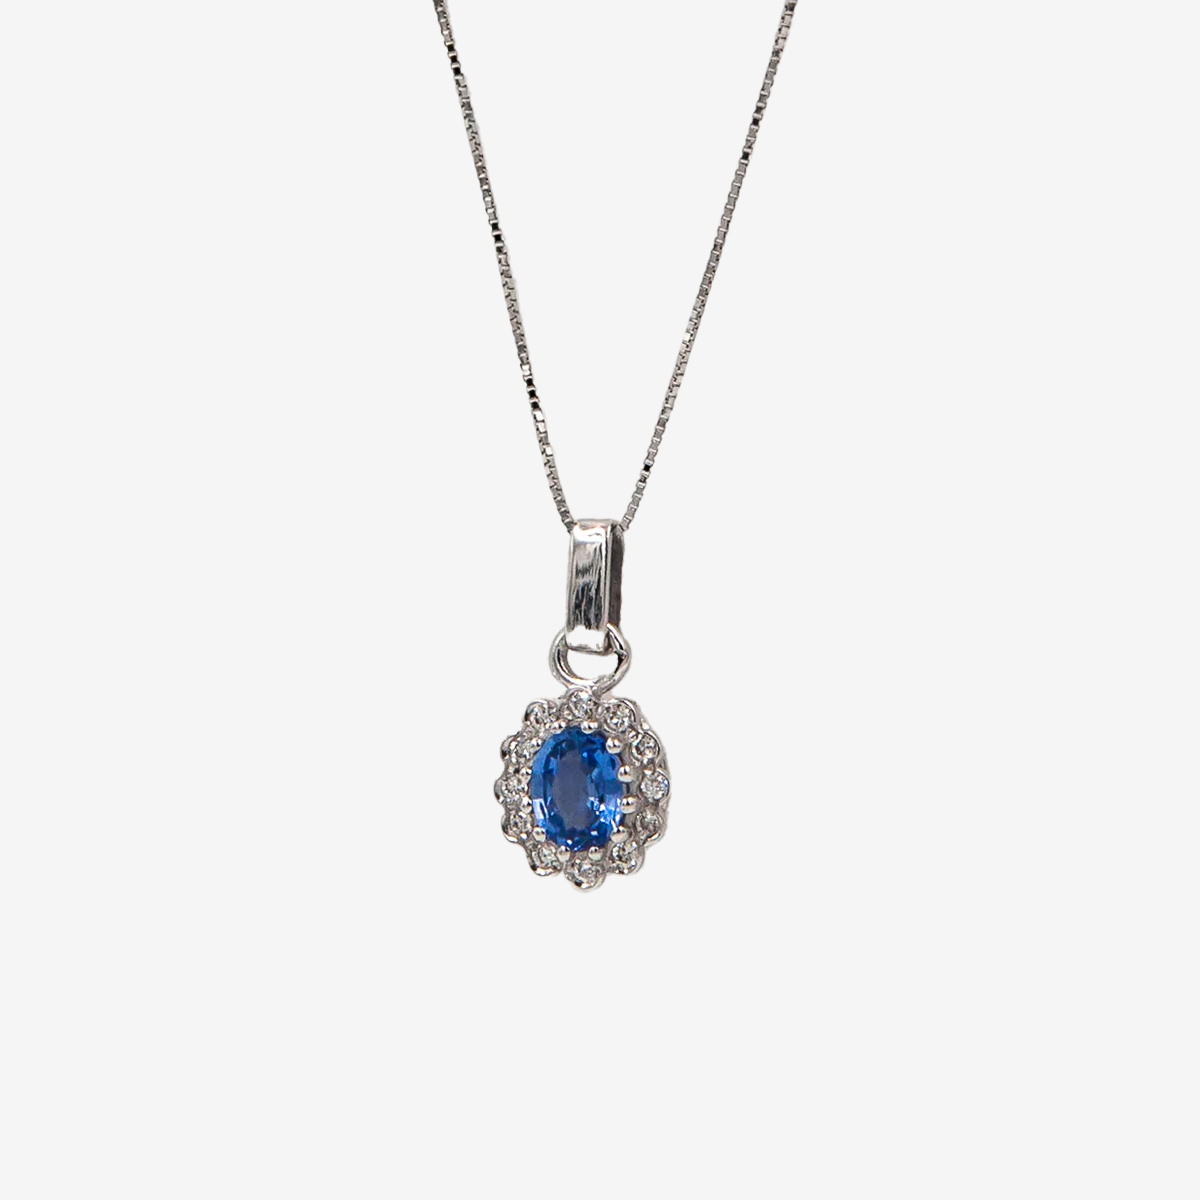 Sapphire Flowers necklace with Diamonds and Sapphire